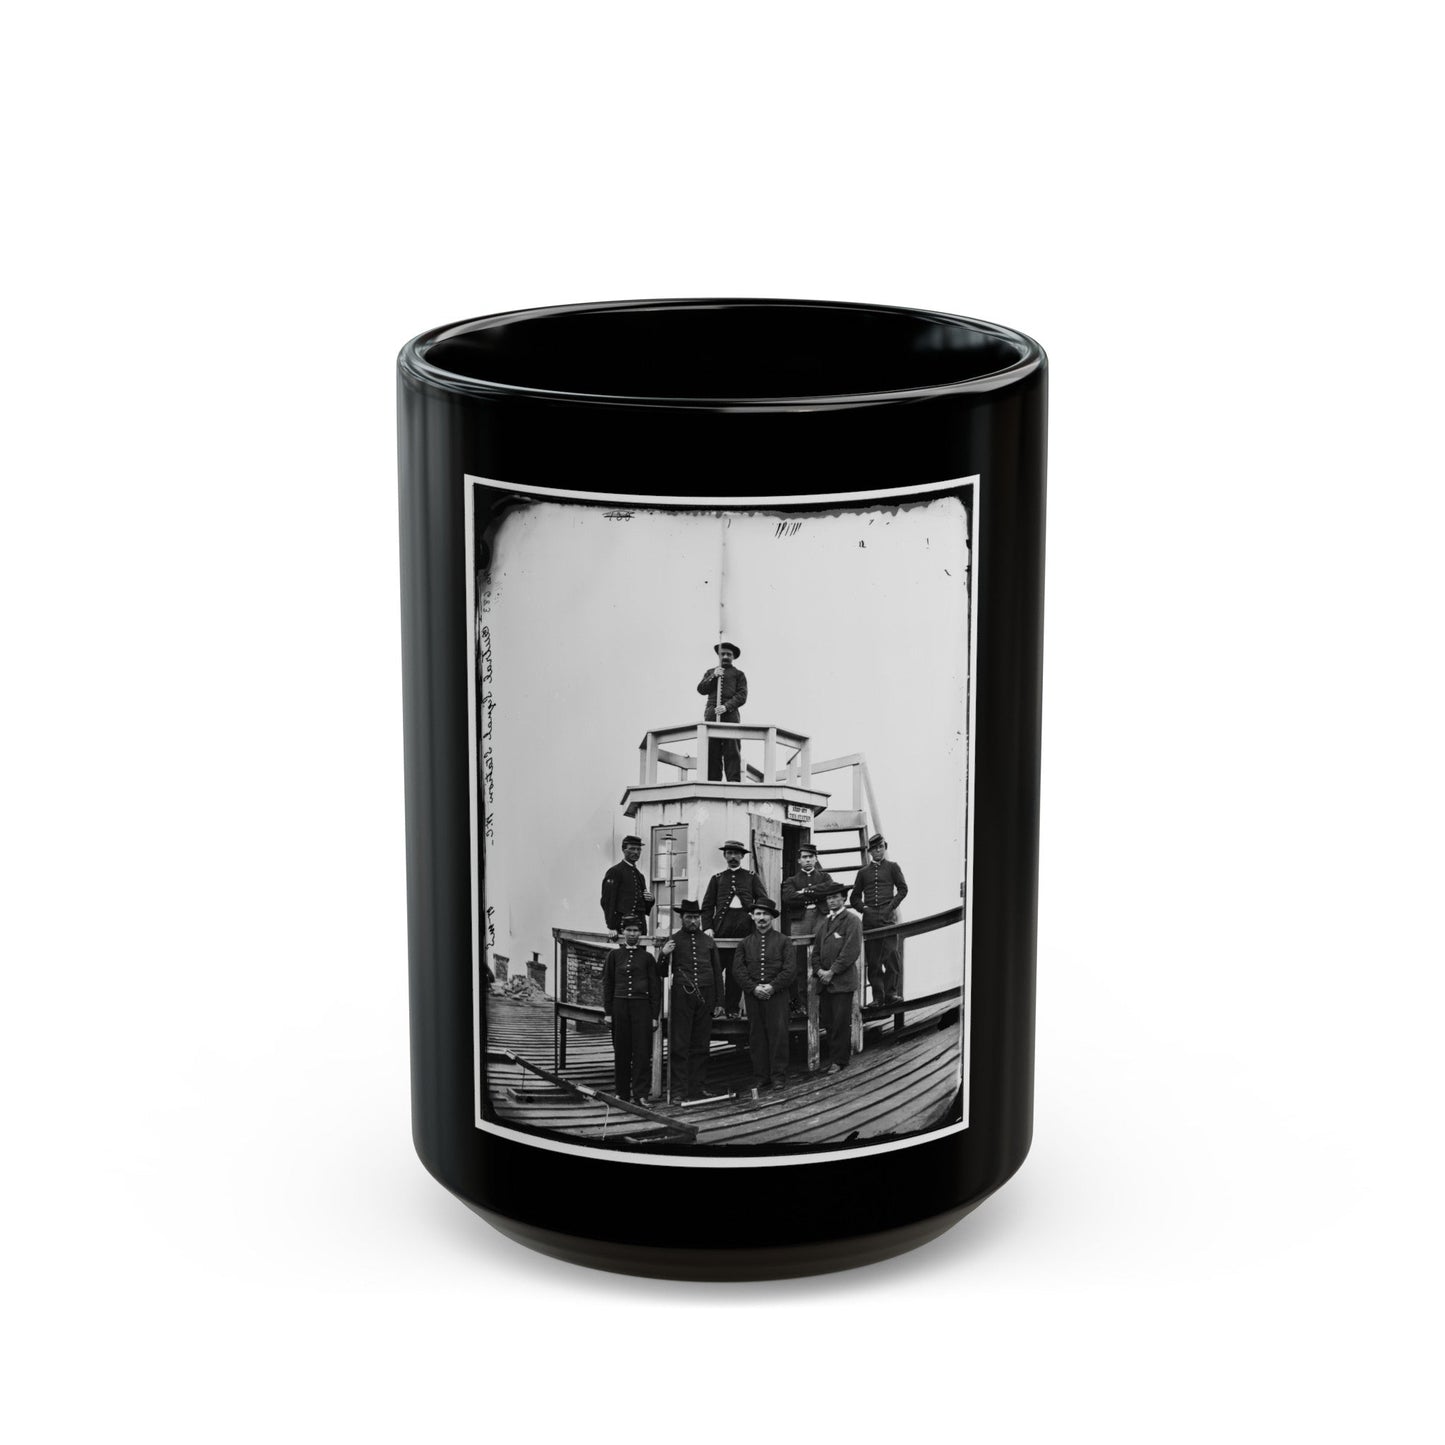 Washington, D.C. Central Signal Station, Winder Building, 17th And E Streets Nw, And Signal Corps Men (U.S. Civil War) Black Coffee Mug